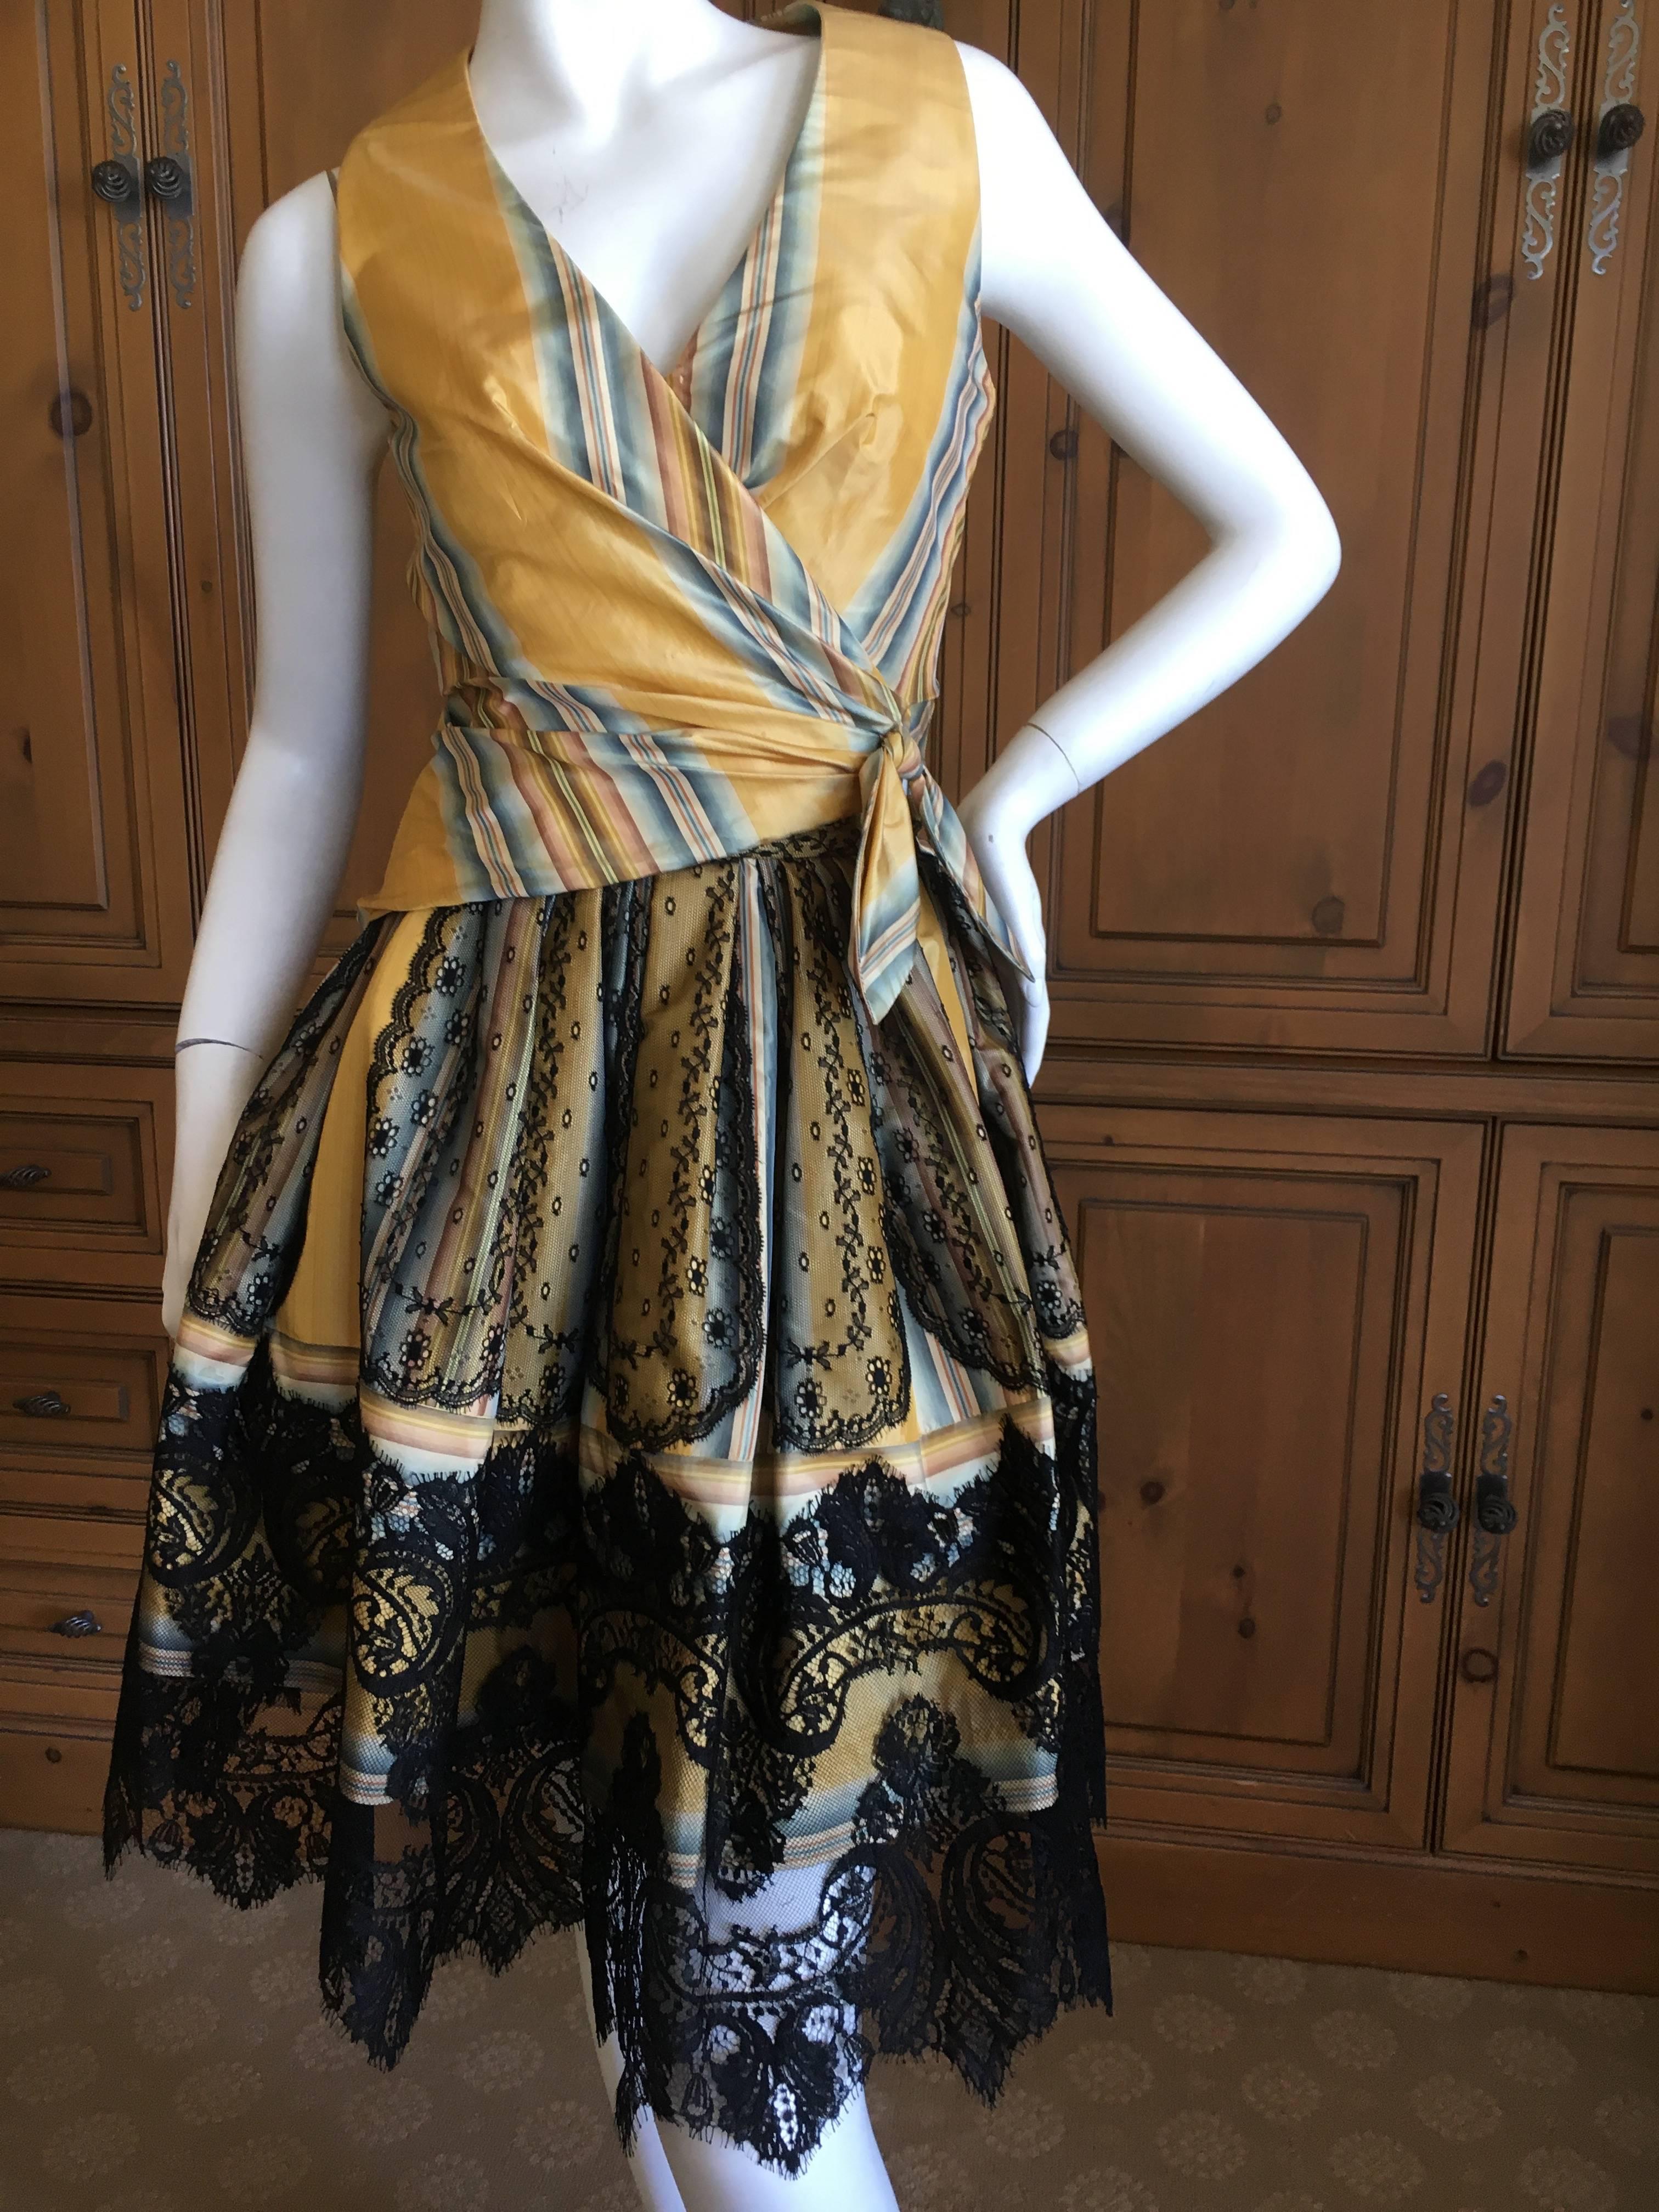 Christian Lacroix Charming Stripe Silk Summer Dress with Artesian Lace Trim Skirt.
This is two pieces , a wrap style sleeveless top and a bubble skirt that would look divine with a mini crinoline underneath..
So chic, so summery.
Size 38
Bust 34